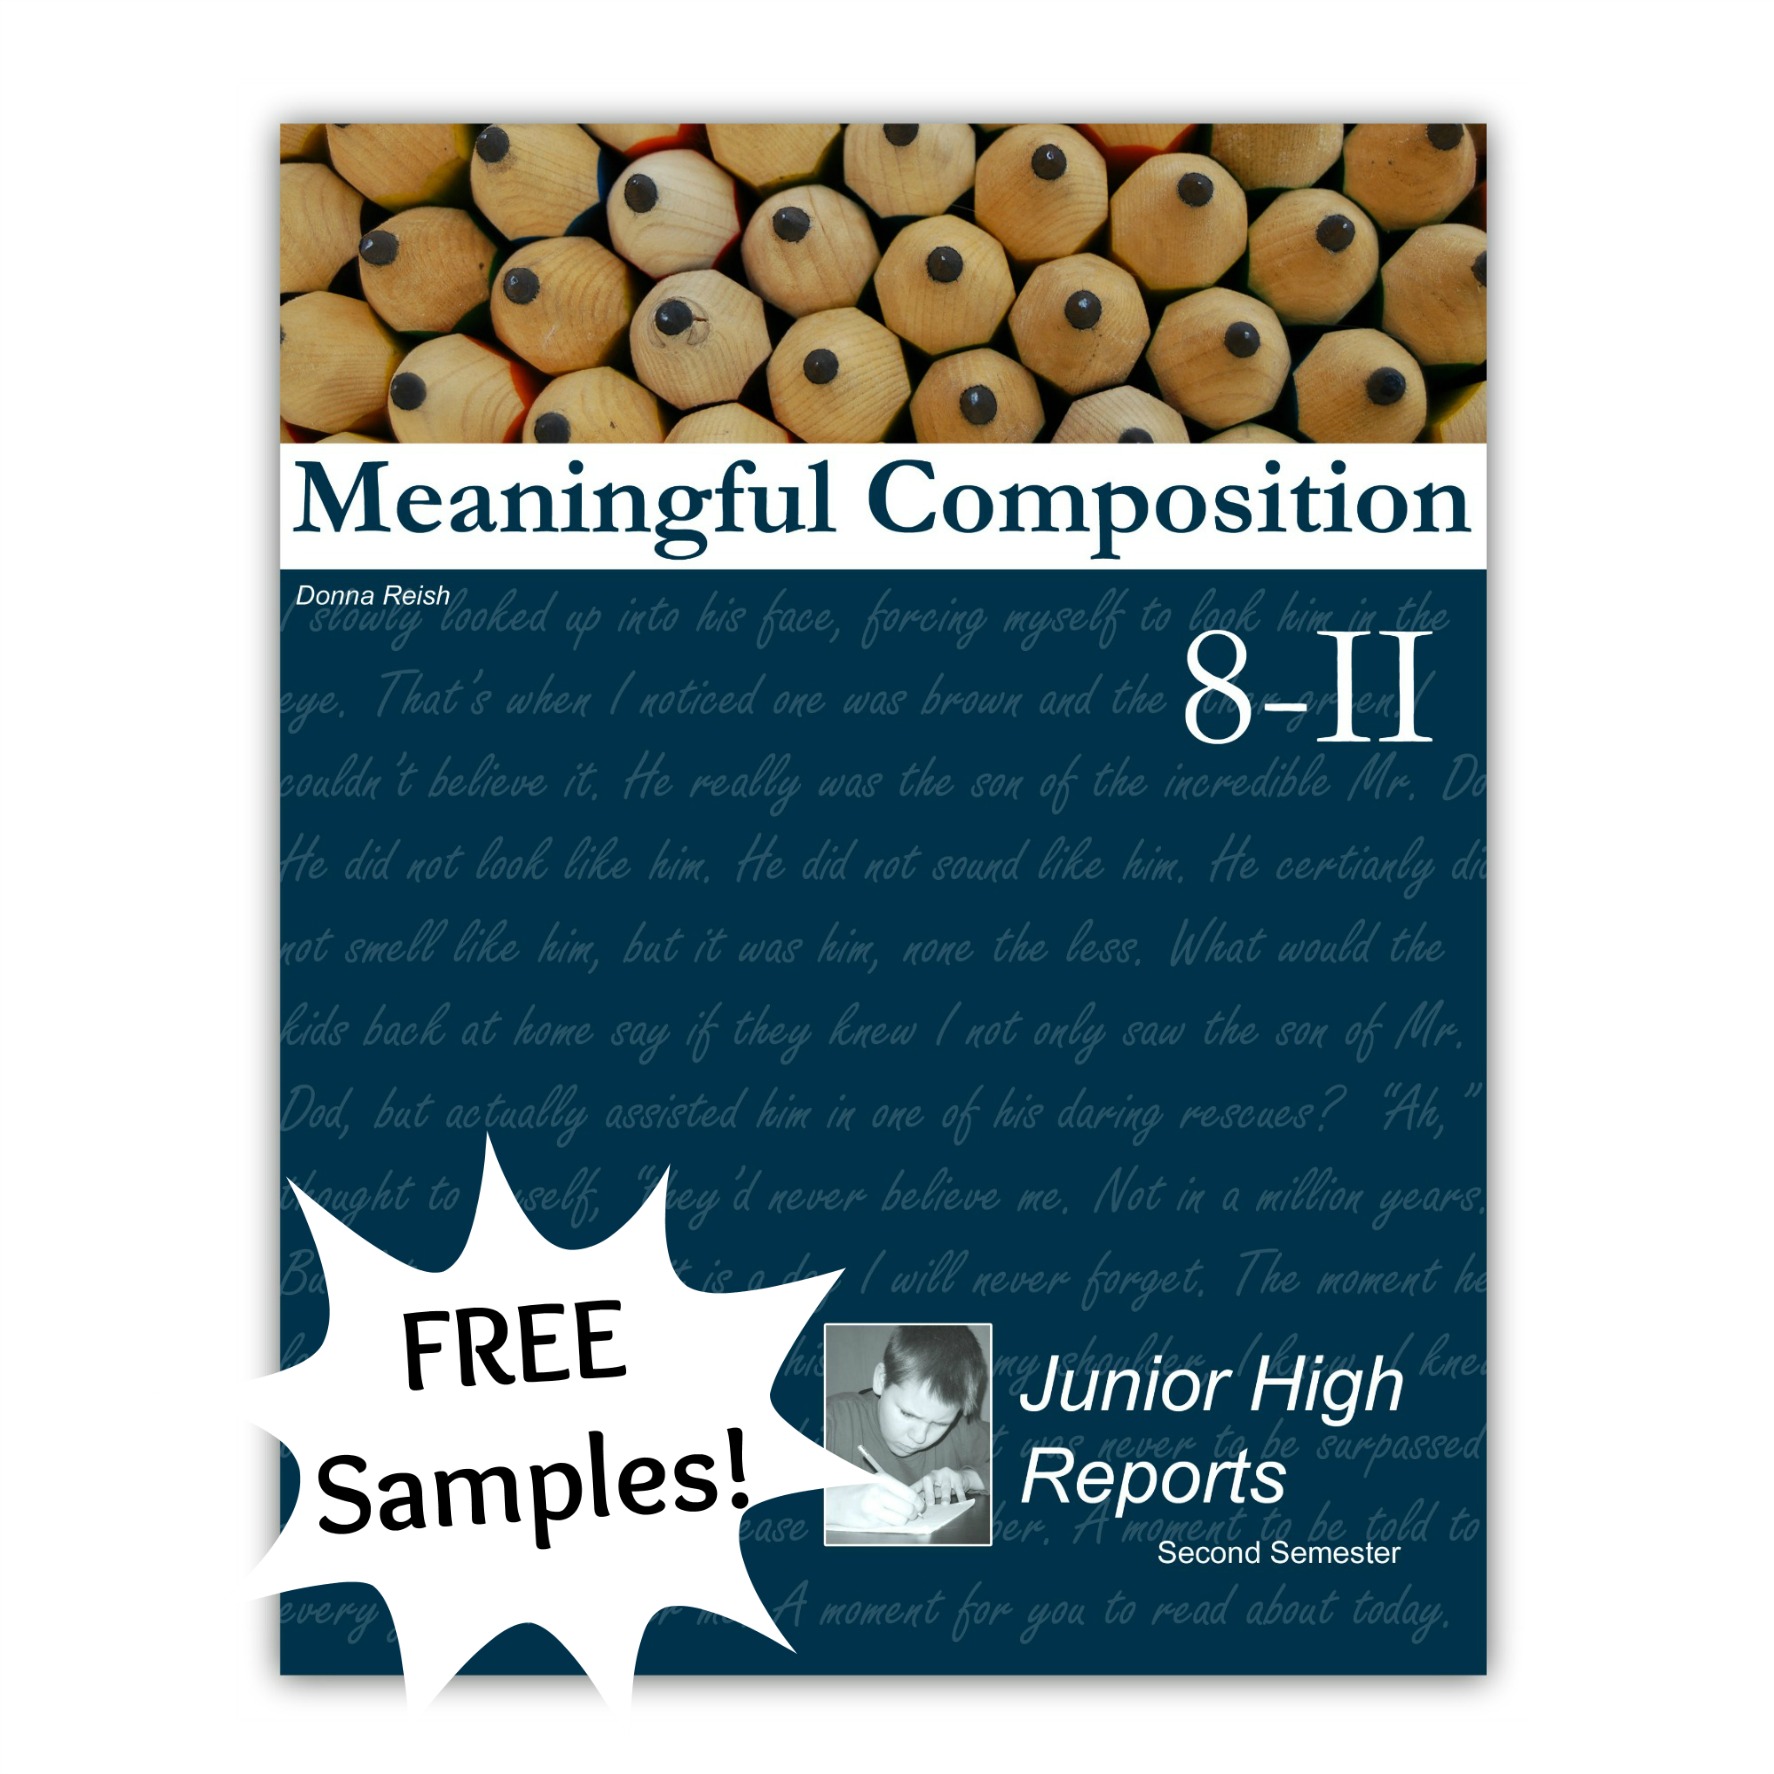 Meaningful Composition 8-II: Junior High Research Reports